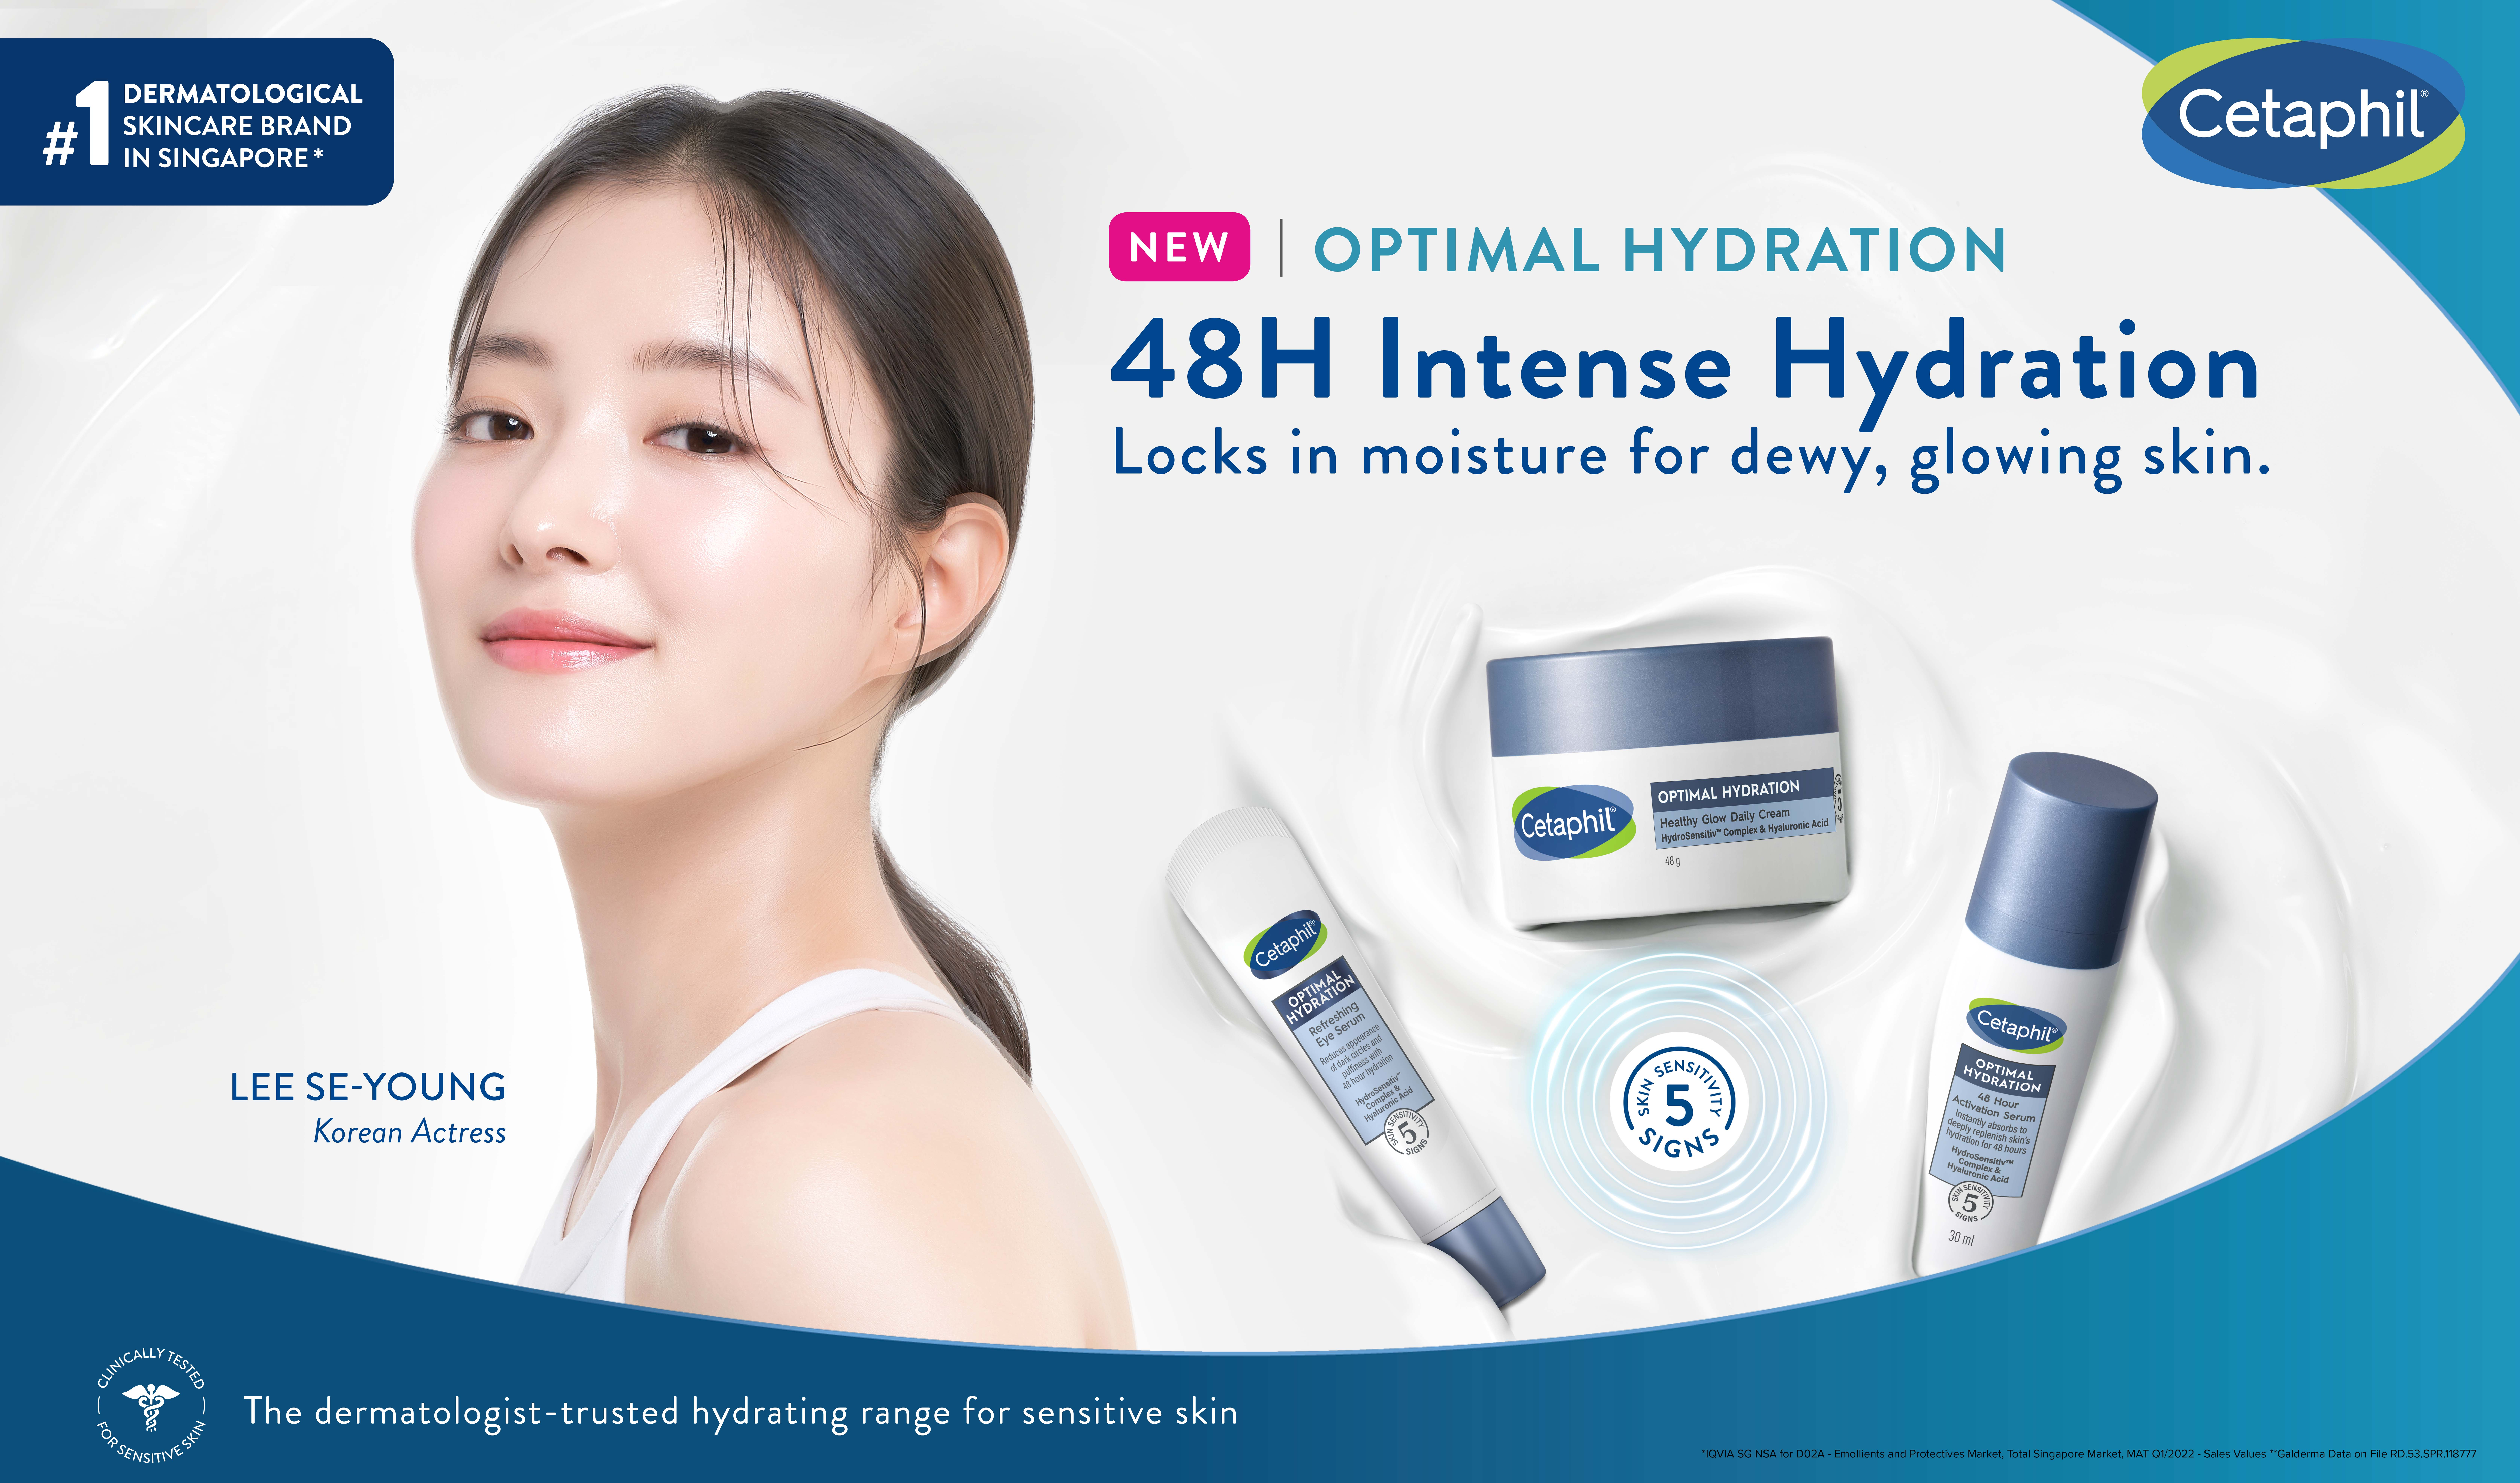 OPTIMAL HYDRATION COLLECTION, FORMULATED WITH HYDROSENSITIV COMPLEX AND BLUE DAISY – CETAPHIL